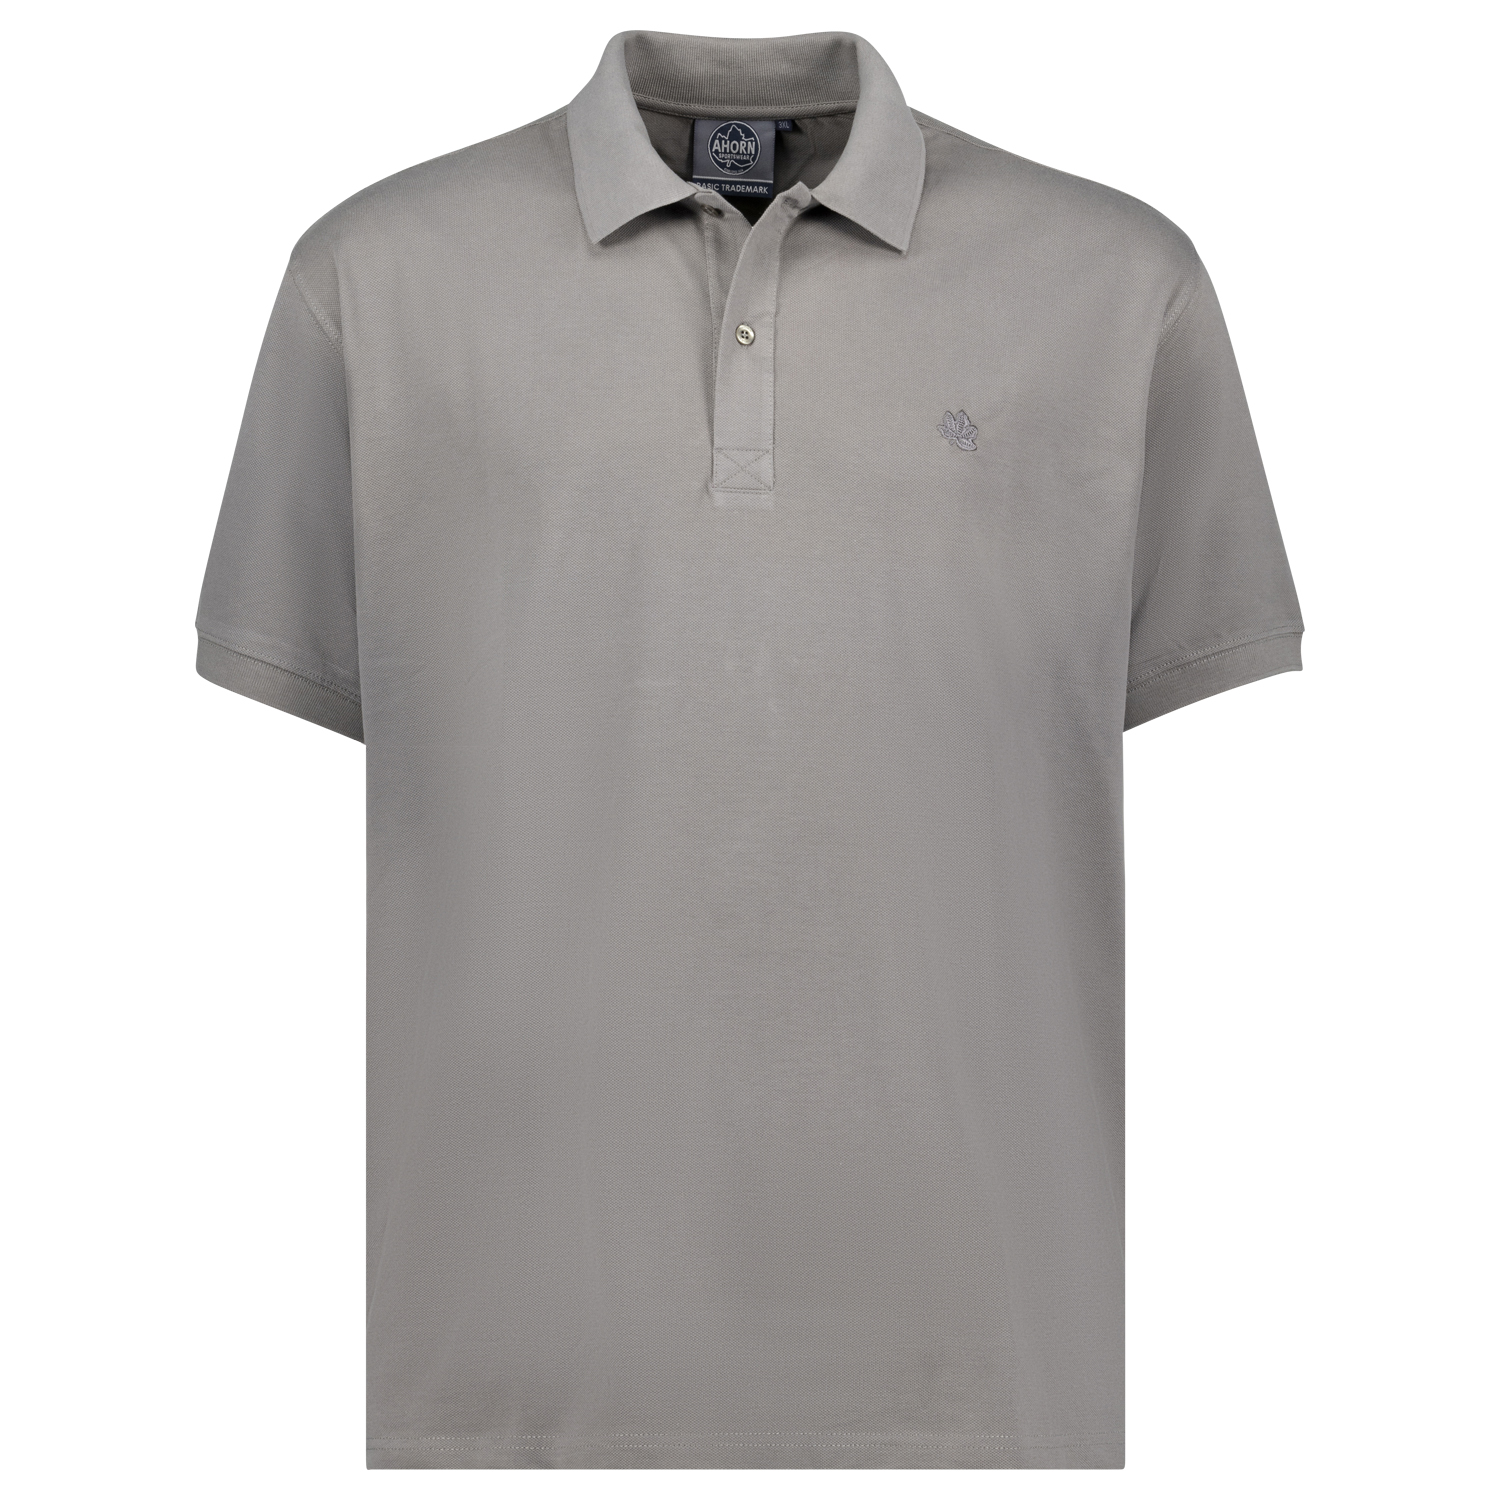 Poloshirt for men by Ahorn Sportswear in extra large sizes until 10 XL / steel grey